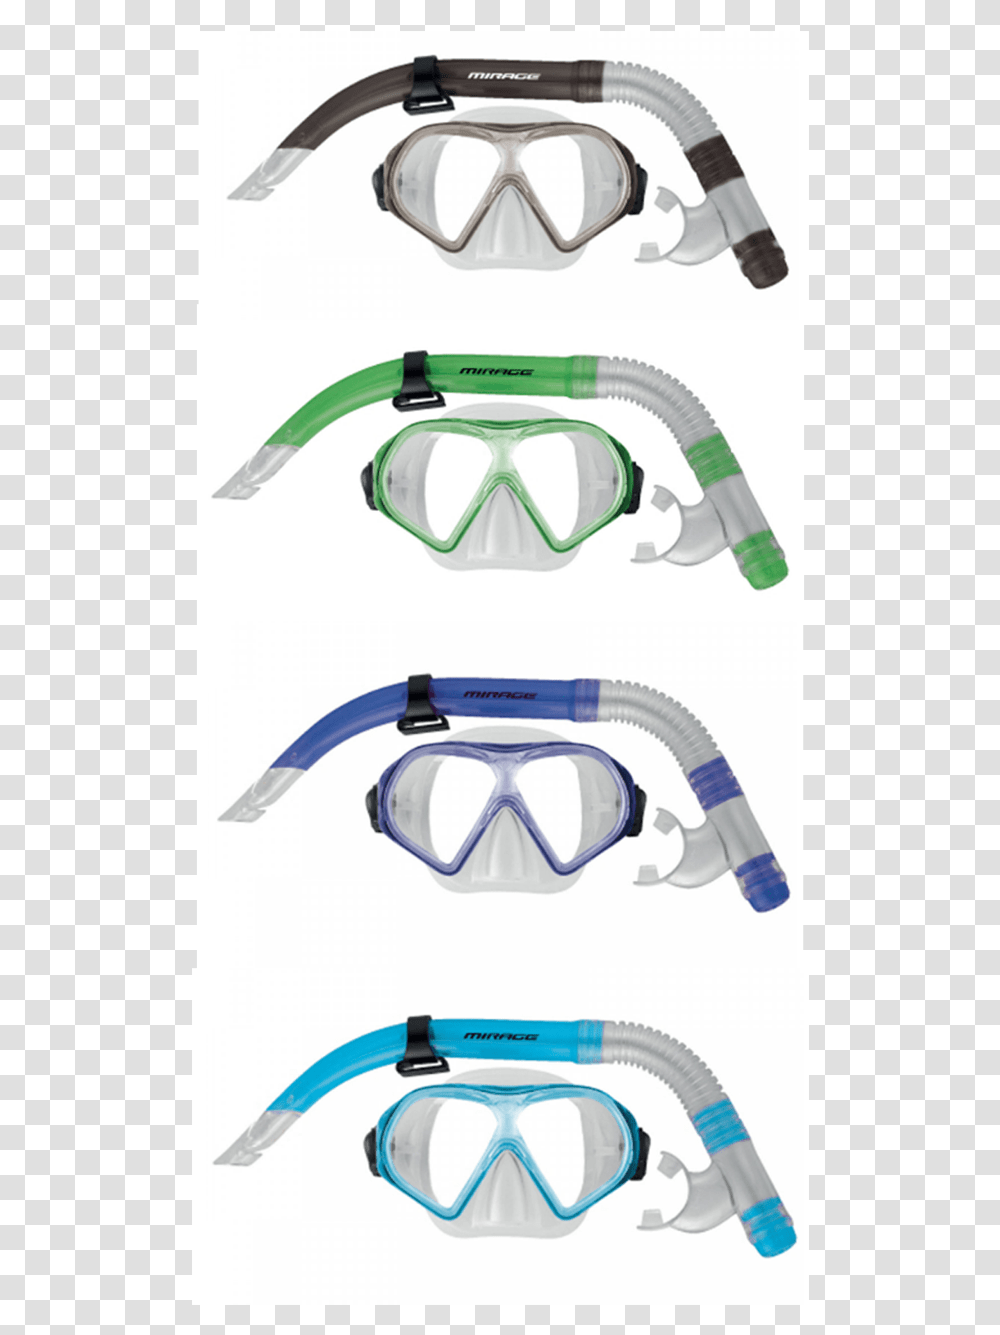 Mirage Set19 Freedom Silicone Adult Mask Amp Snorkel Diving Mask, Goggles, Accessories, Accessory, Sunglasses Transparent Png